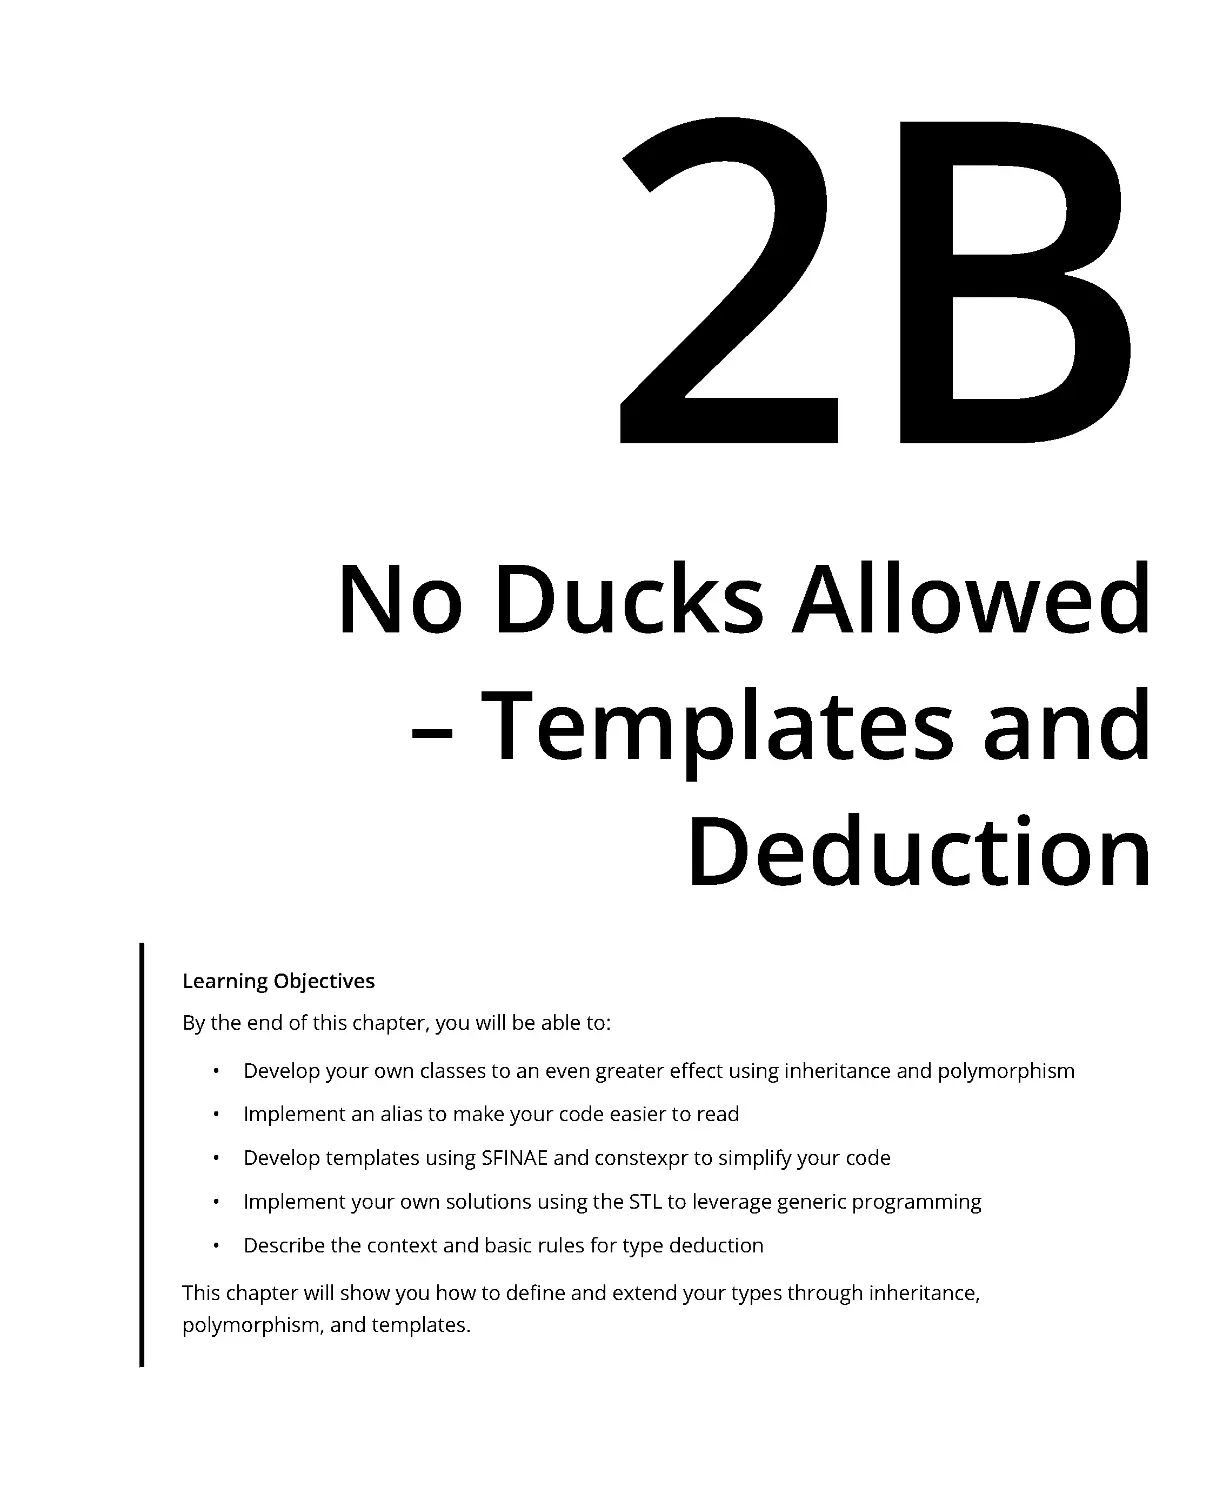 Chapter 2B: No Ducks Allowed – Templates and Deduction